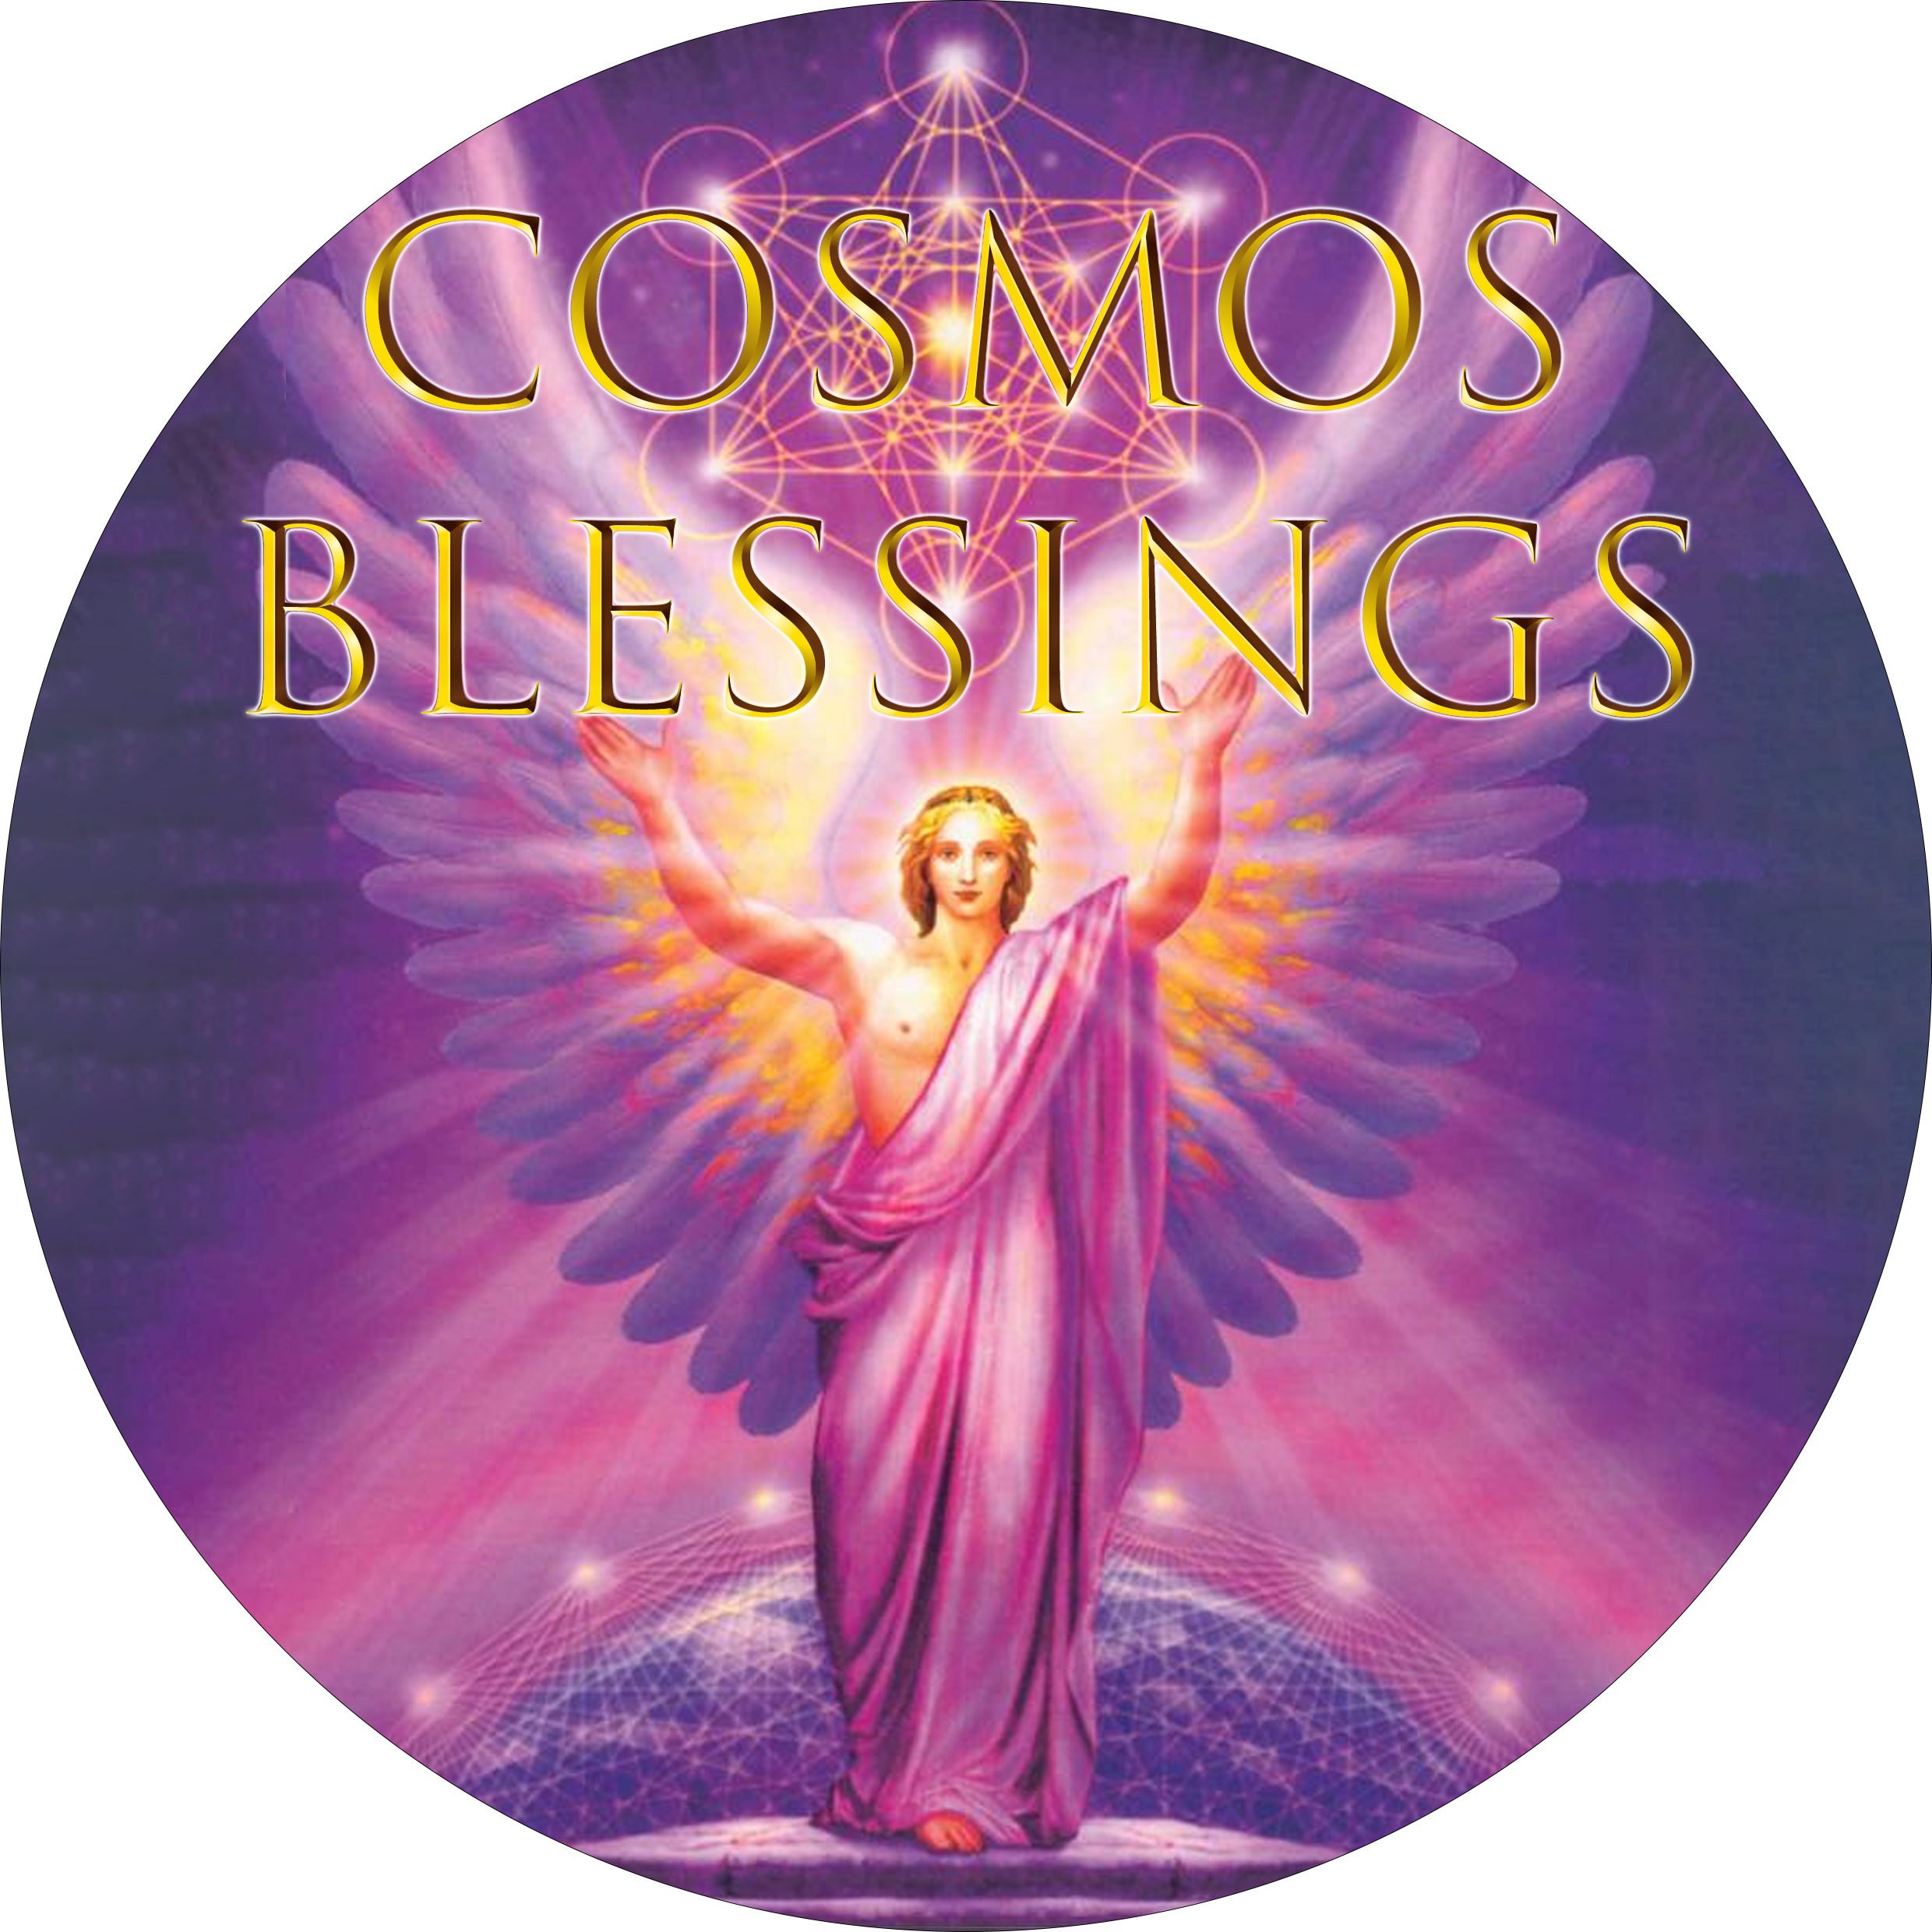 Cosmos Blessings